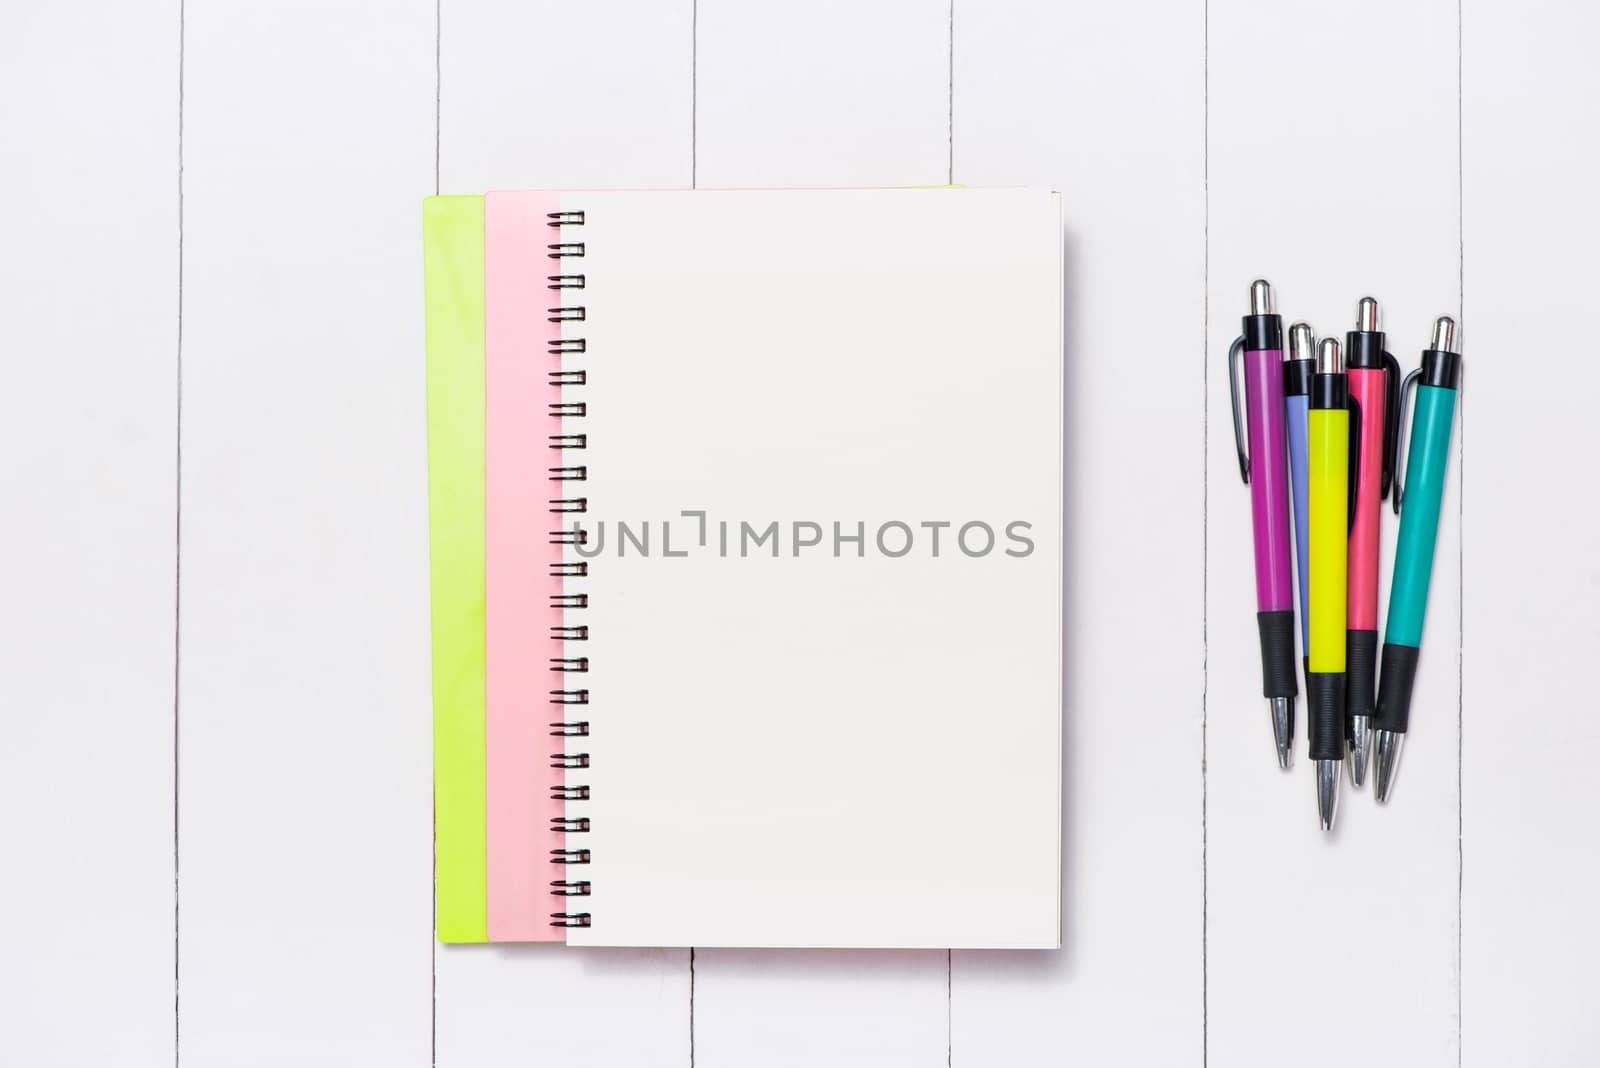 School stationery or office supplies on wood background.